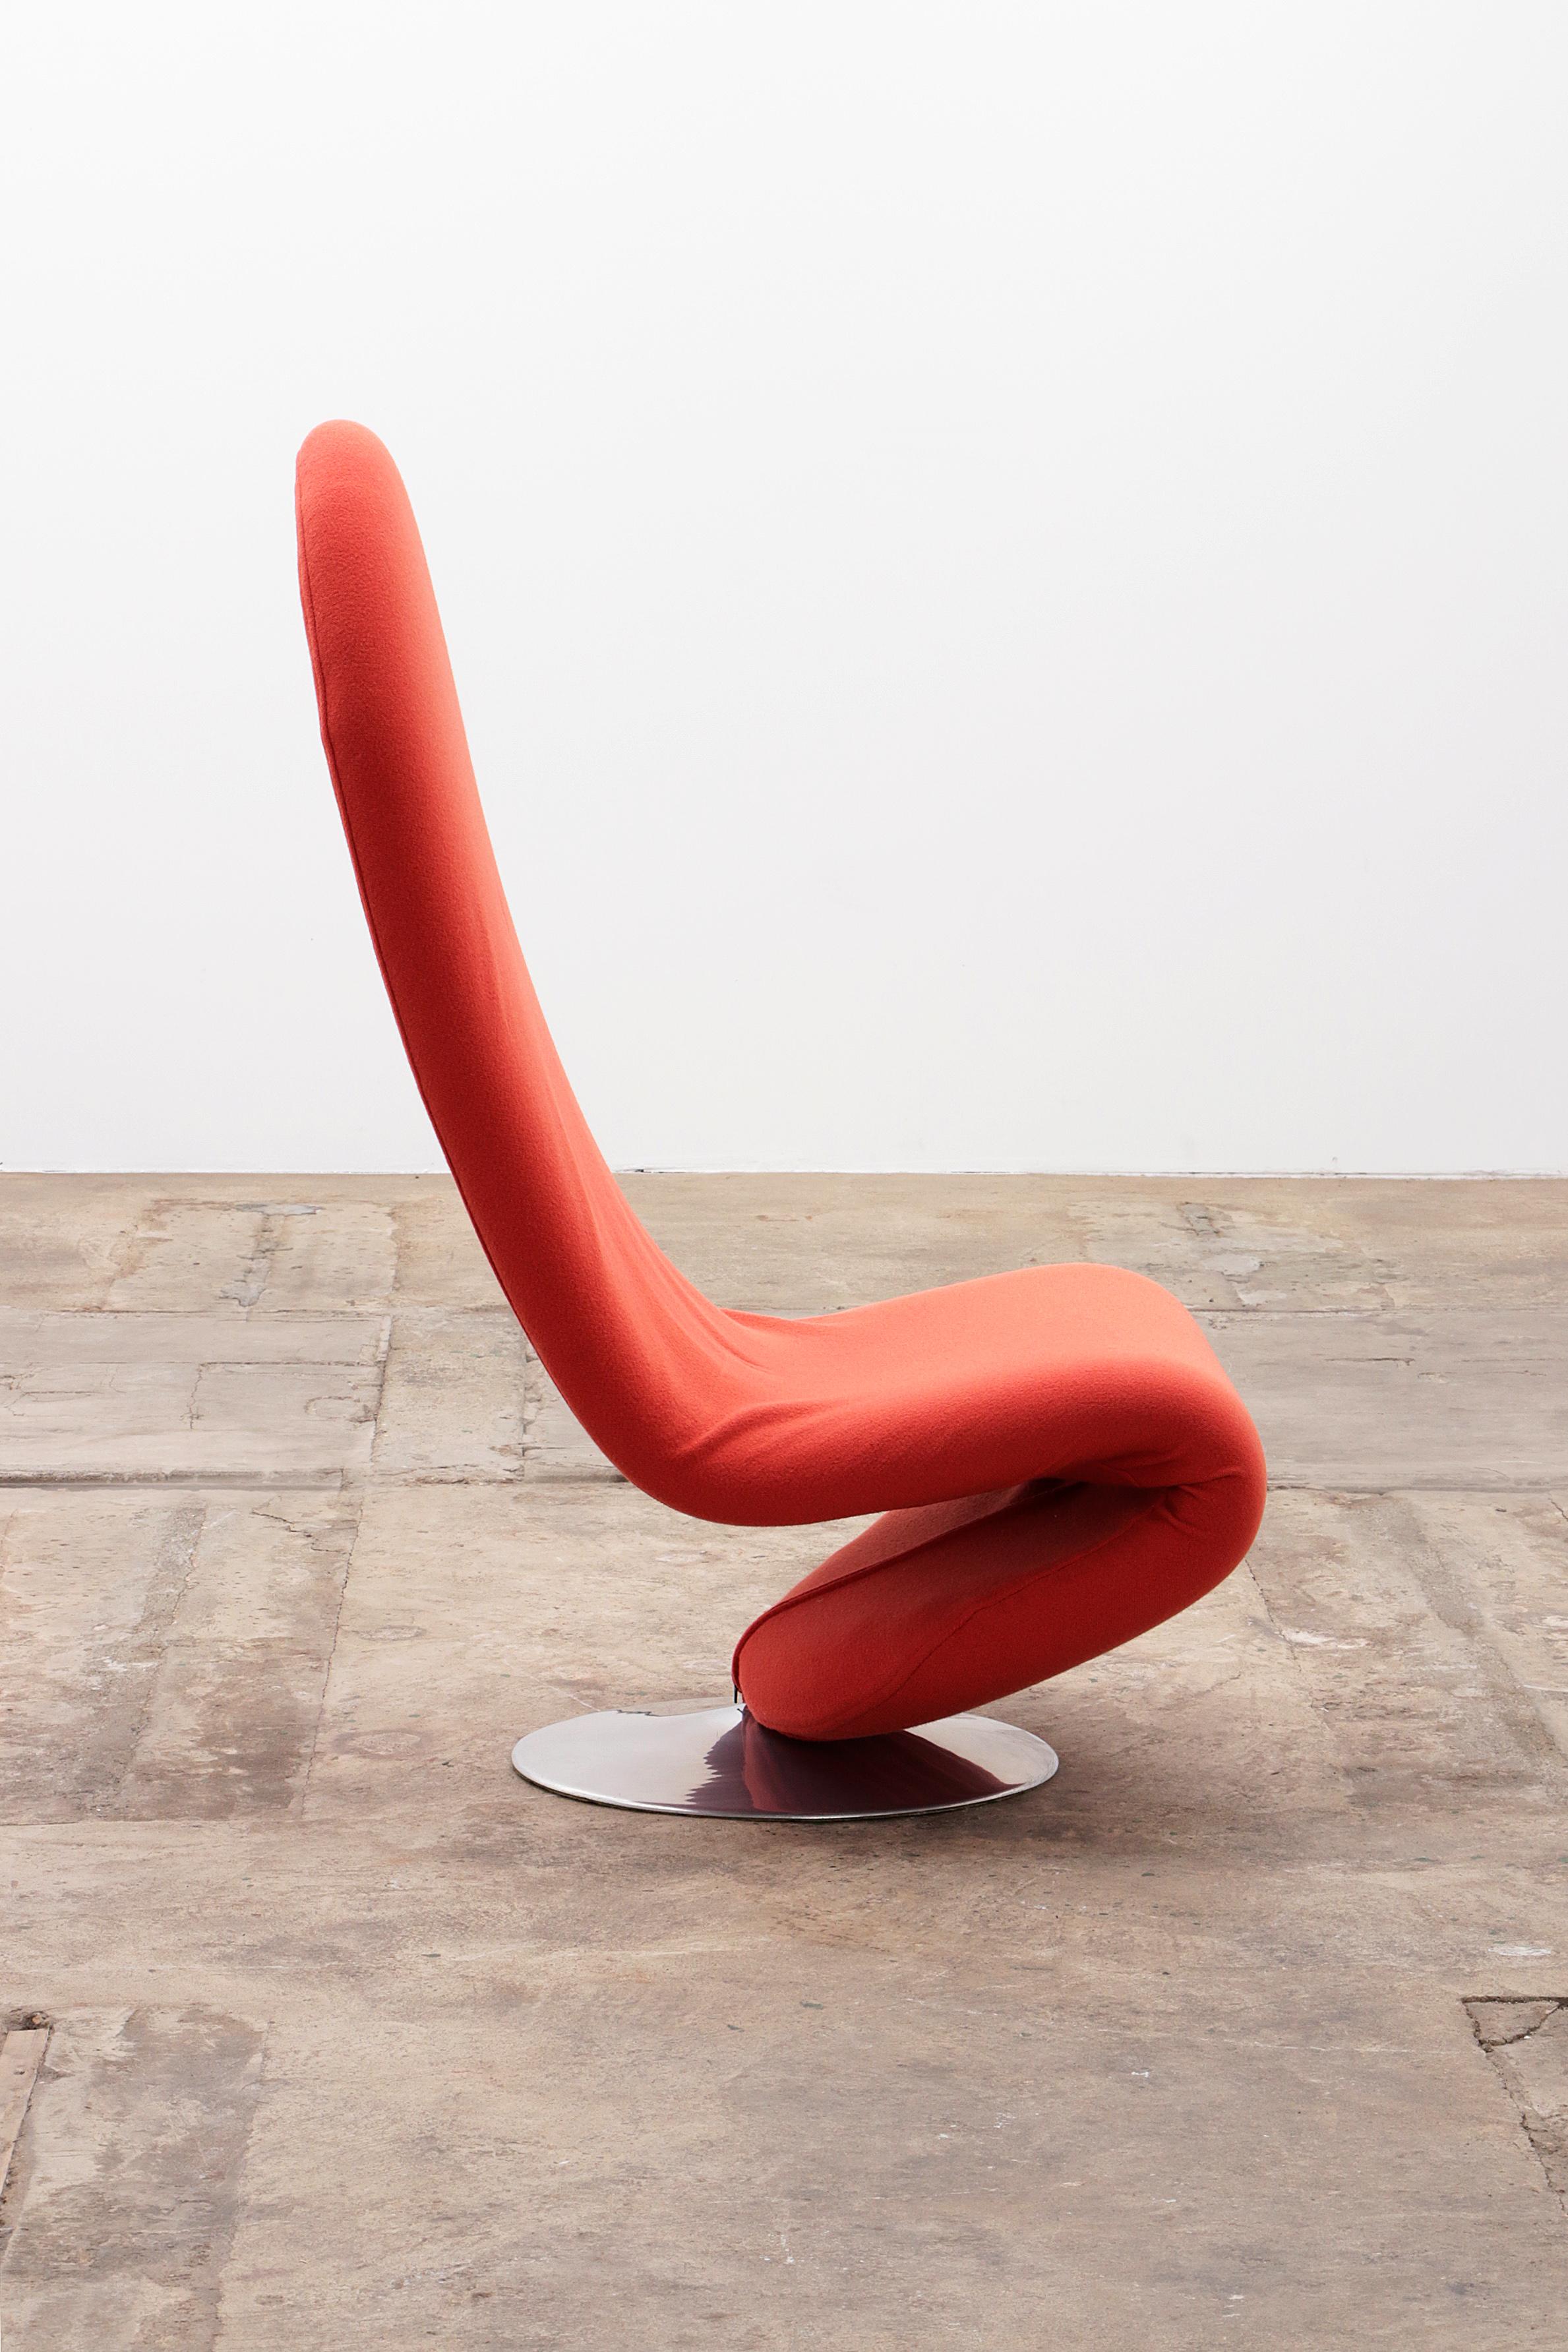 Late 20th Century Verner Panton 1-2-3 Chair with High Backrest - Red/Orange, 1973 For Sale